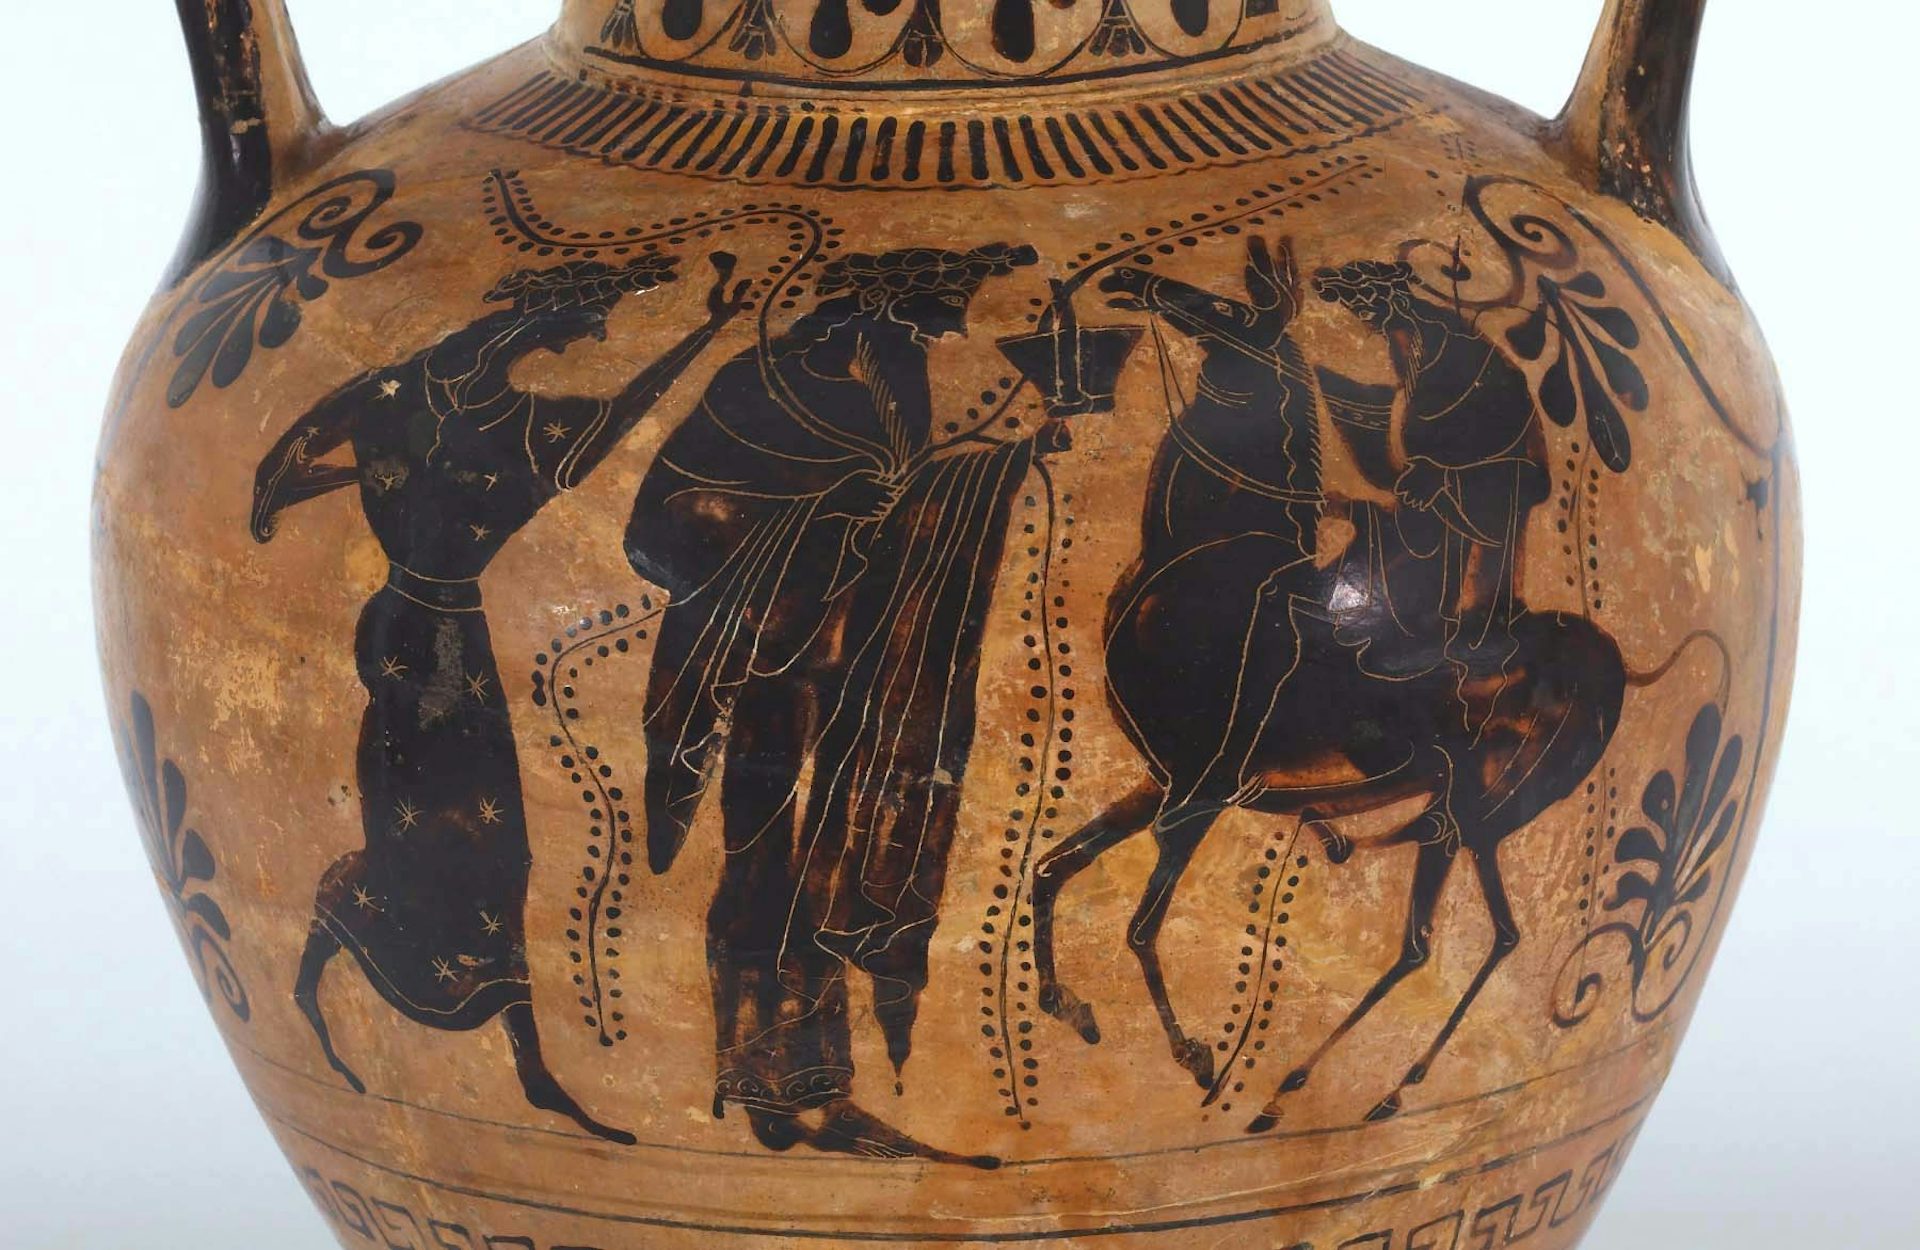 Amphora with Herakles and Apollo fighting